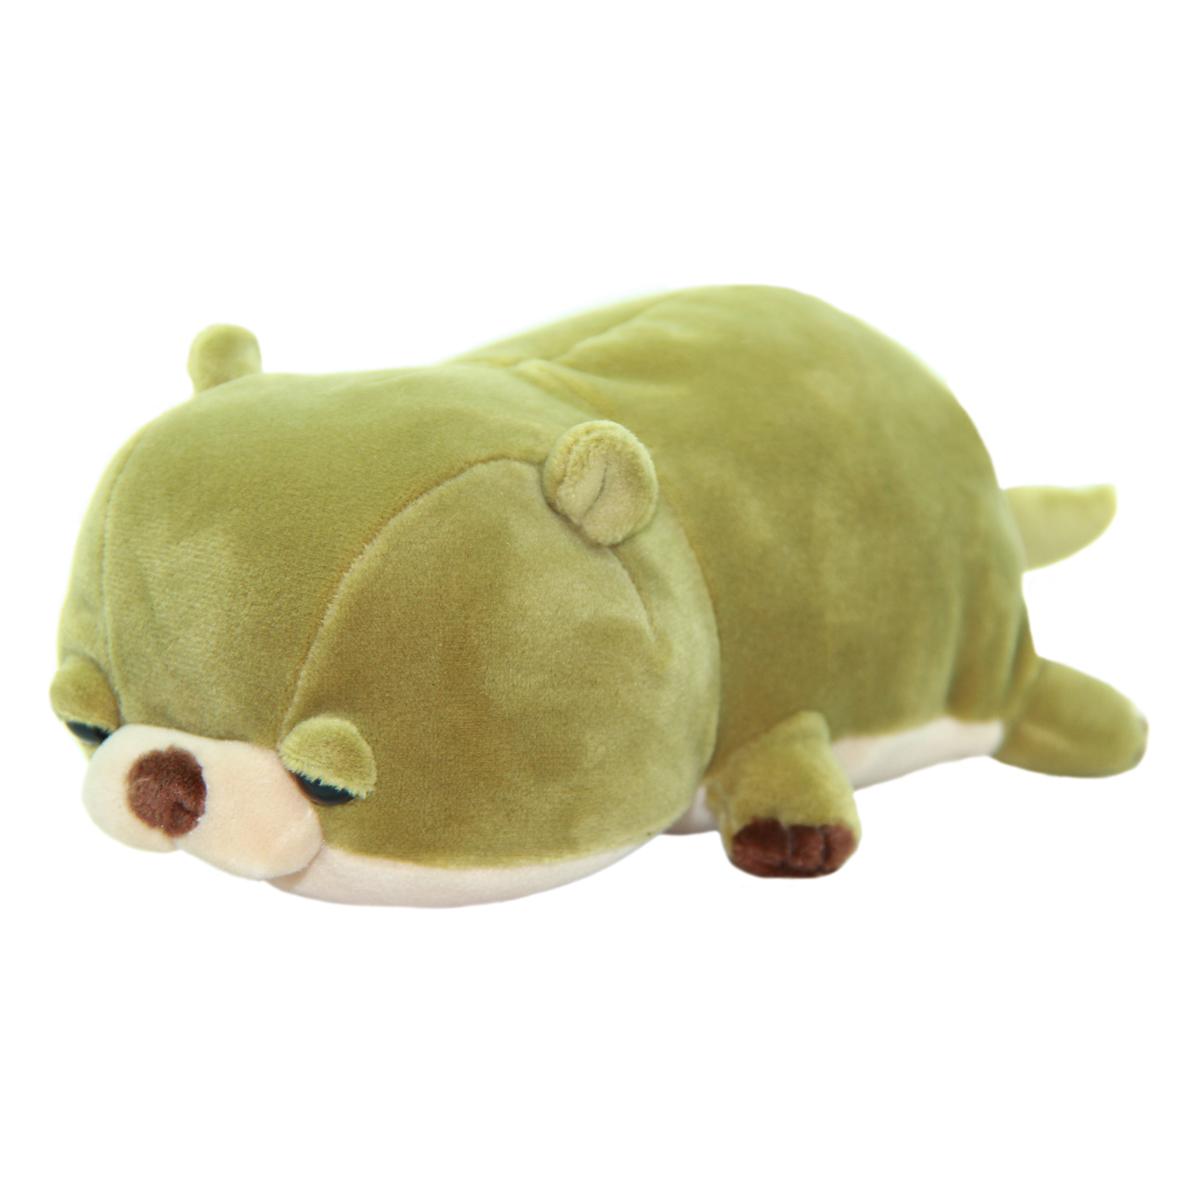 Mochi Puni Kawauso Collection Super Soft Otter Plush Toy Olive Green 8 Inches